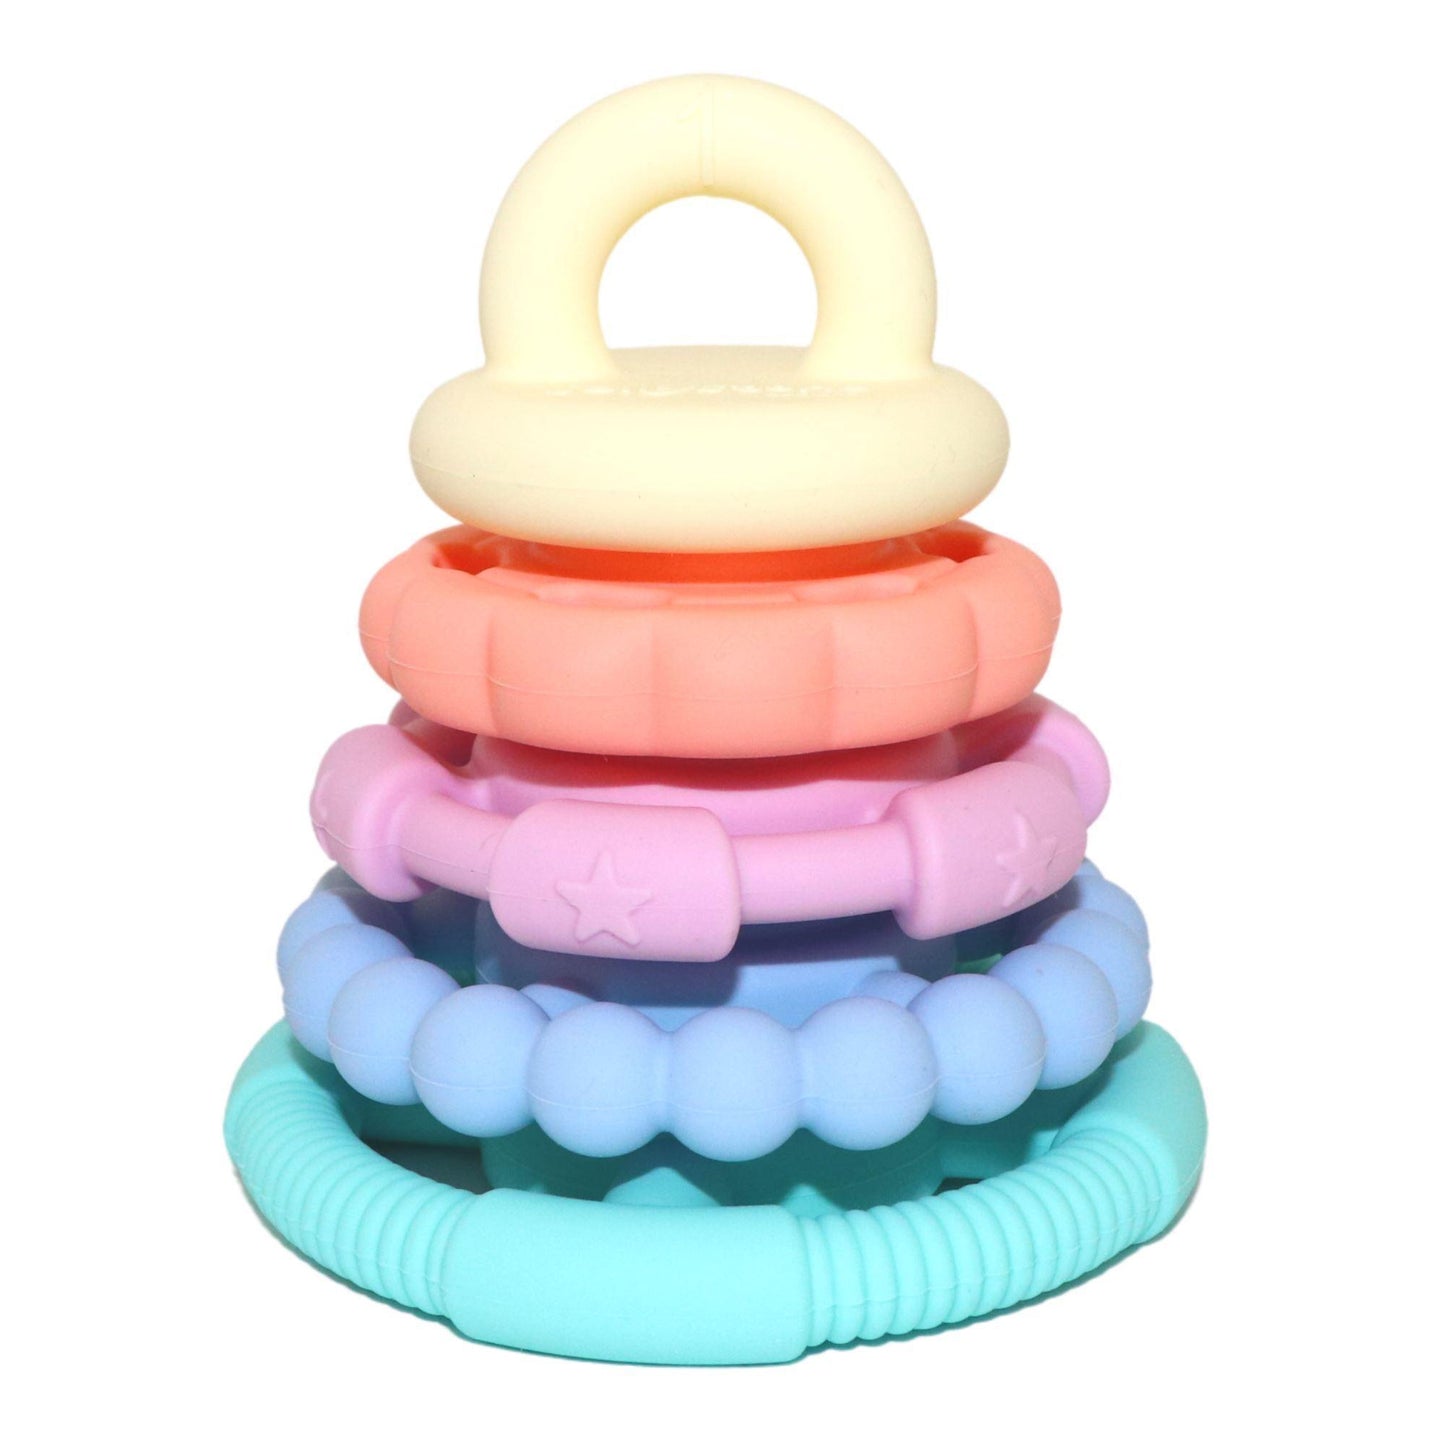 RAINBOW STACKER AND TEETHER TOY PASTEL Teether Toy Jellystone Designs 